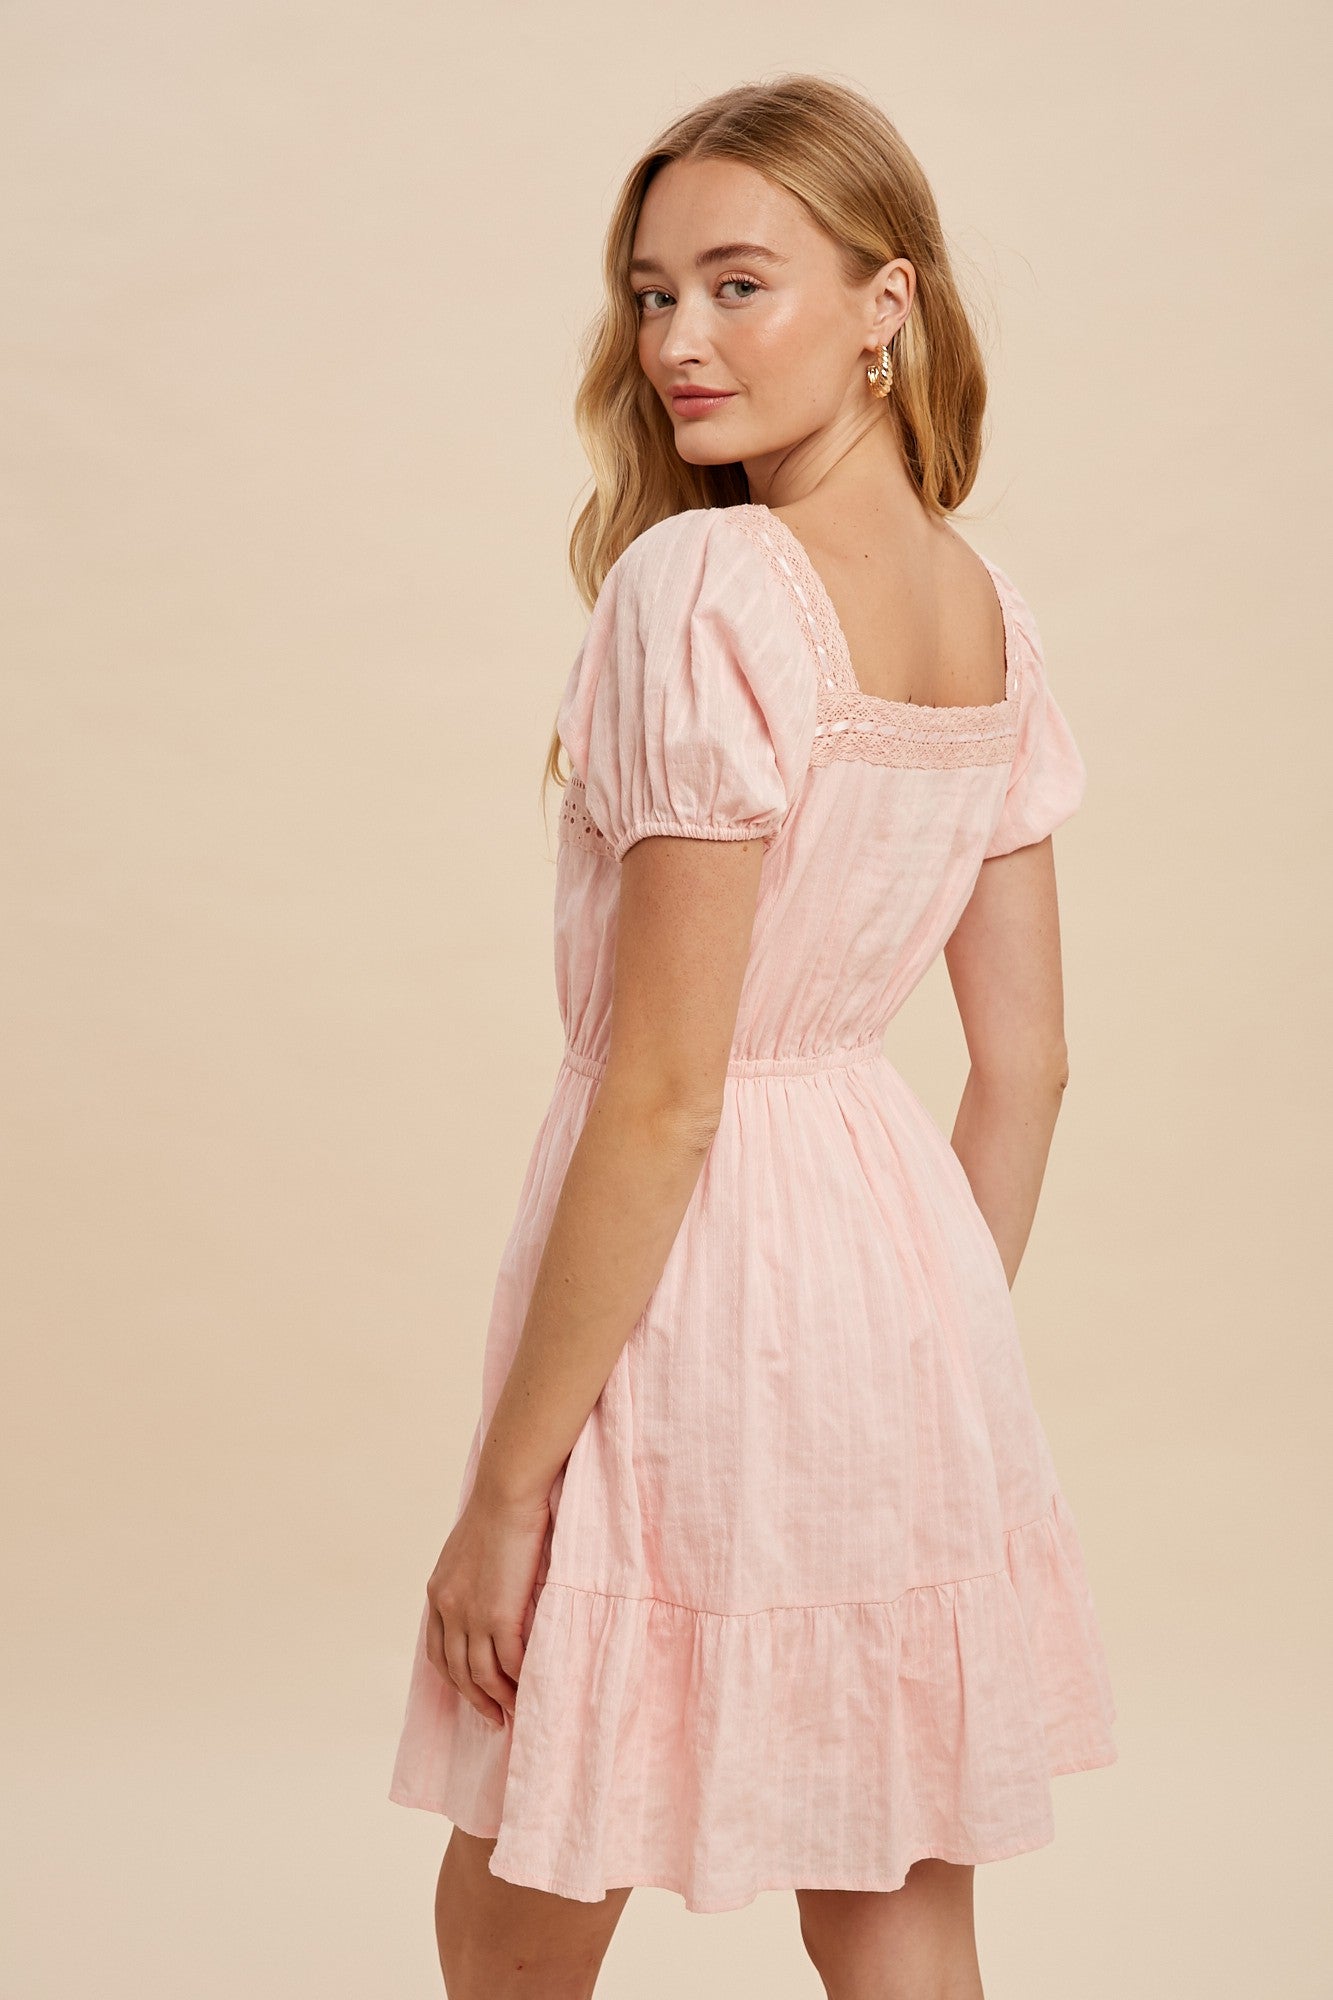 DOLLY - KNEE LENGHTH DRESS